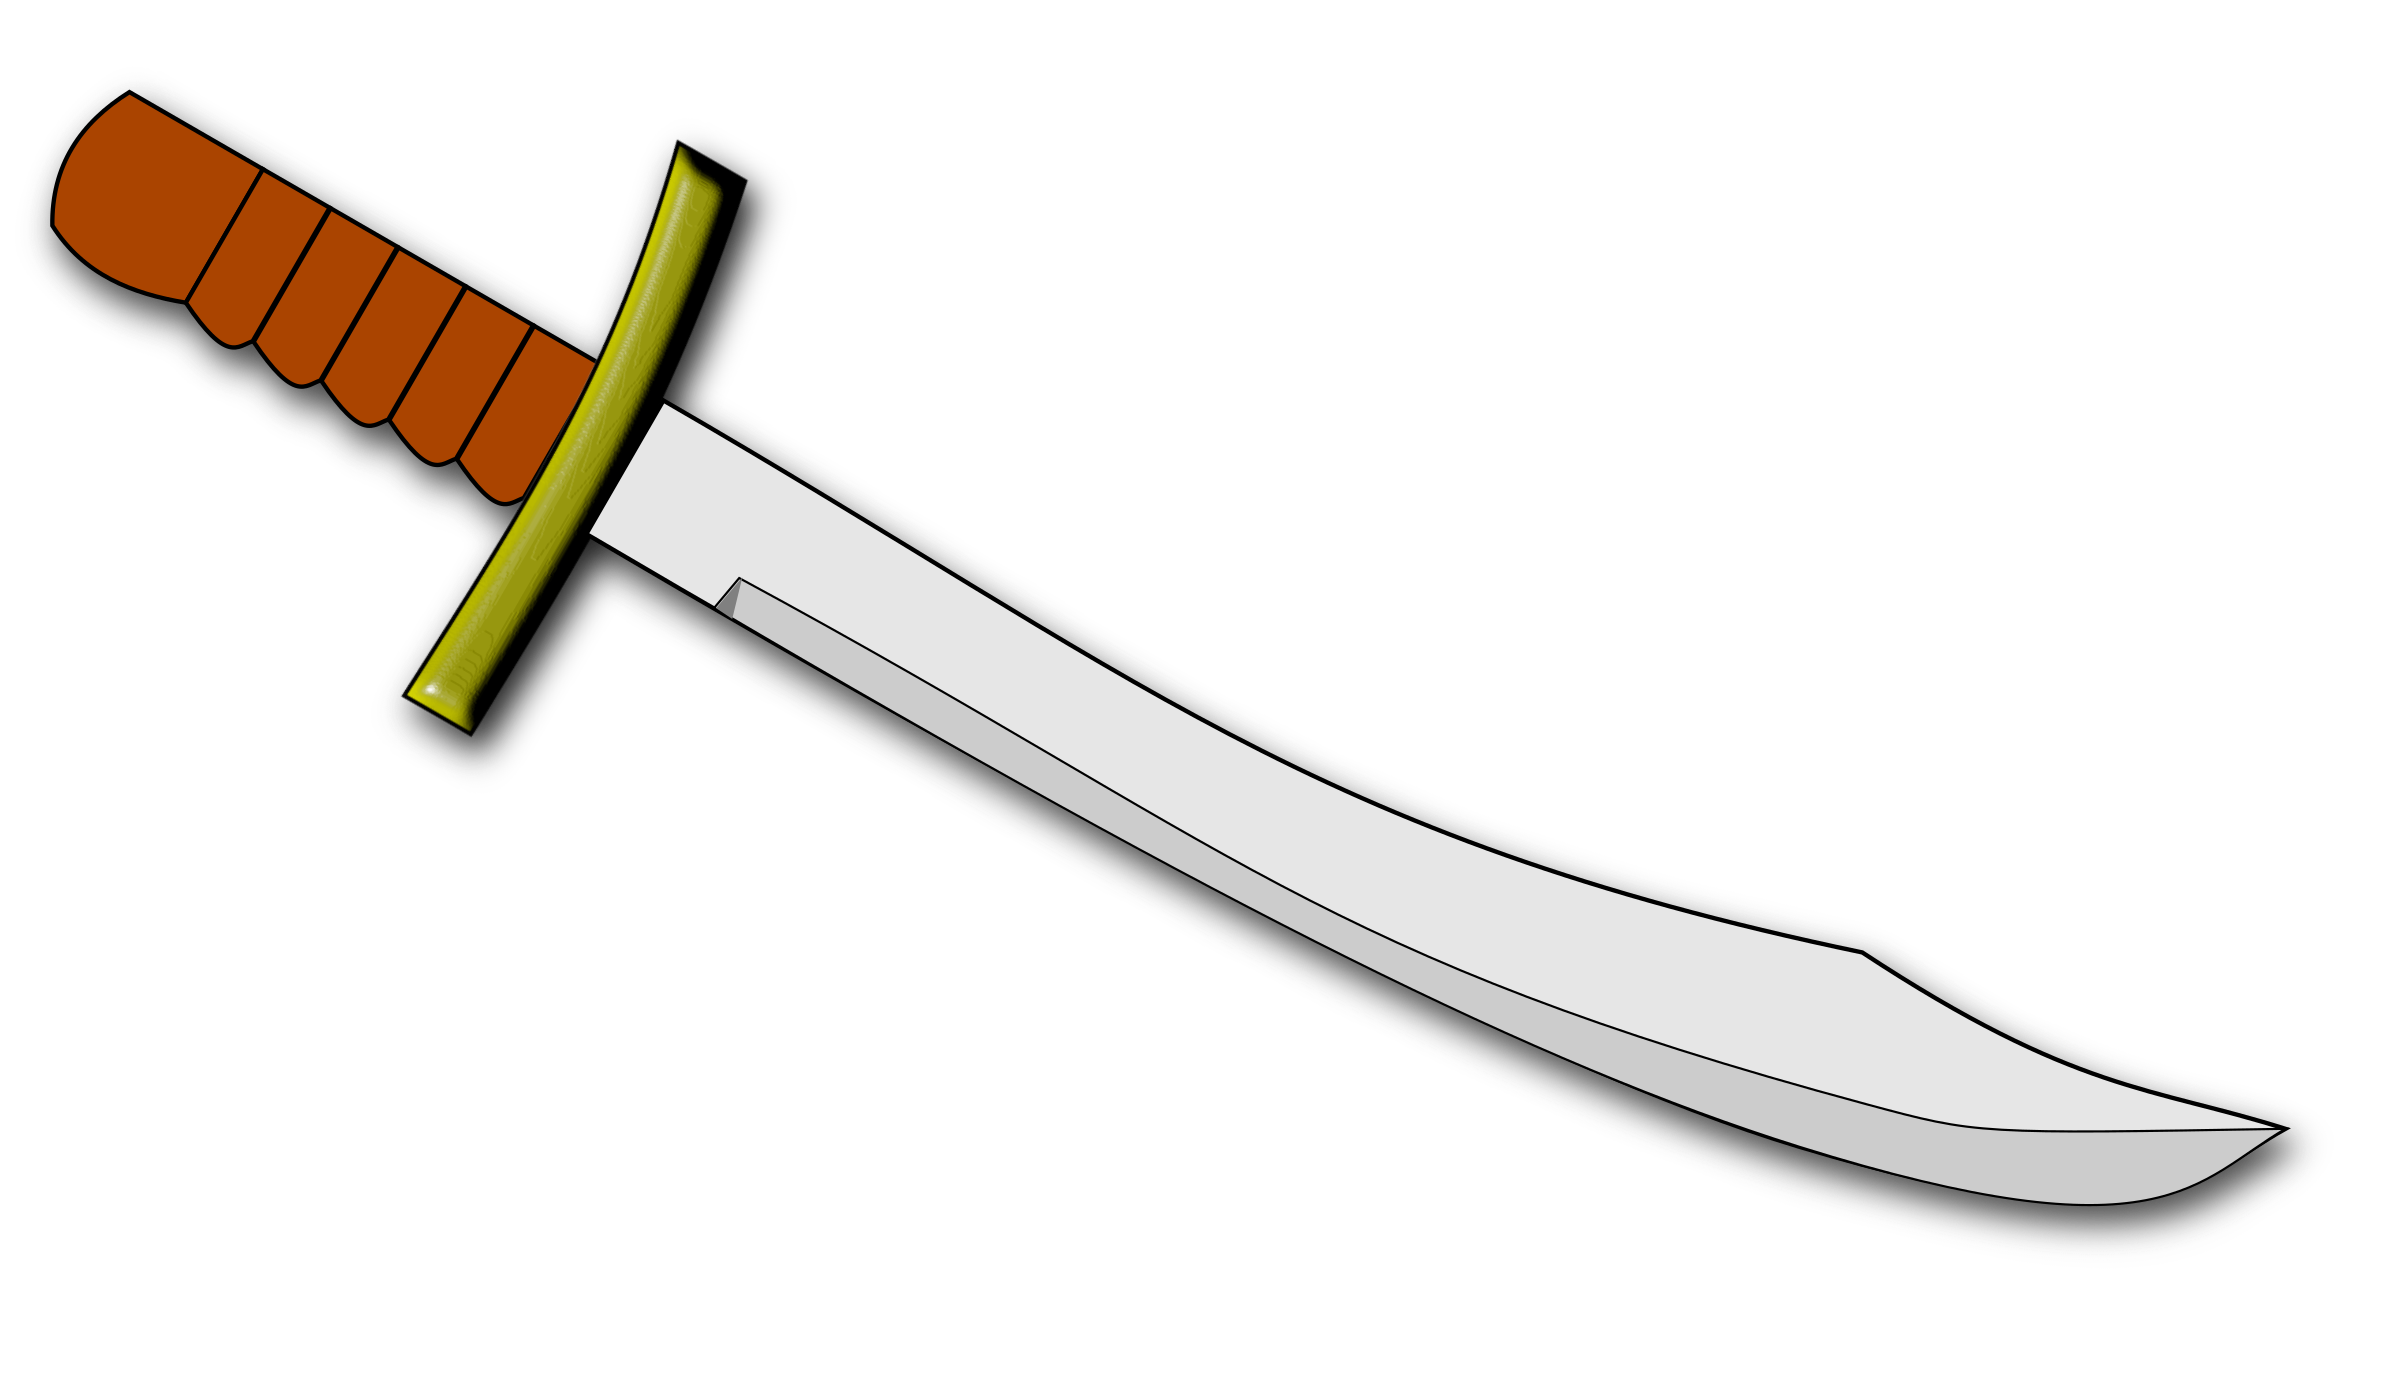 dagger clipart curved